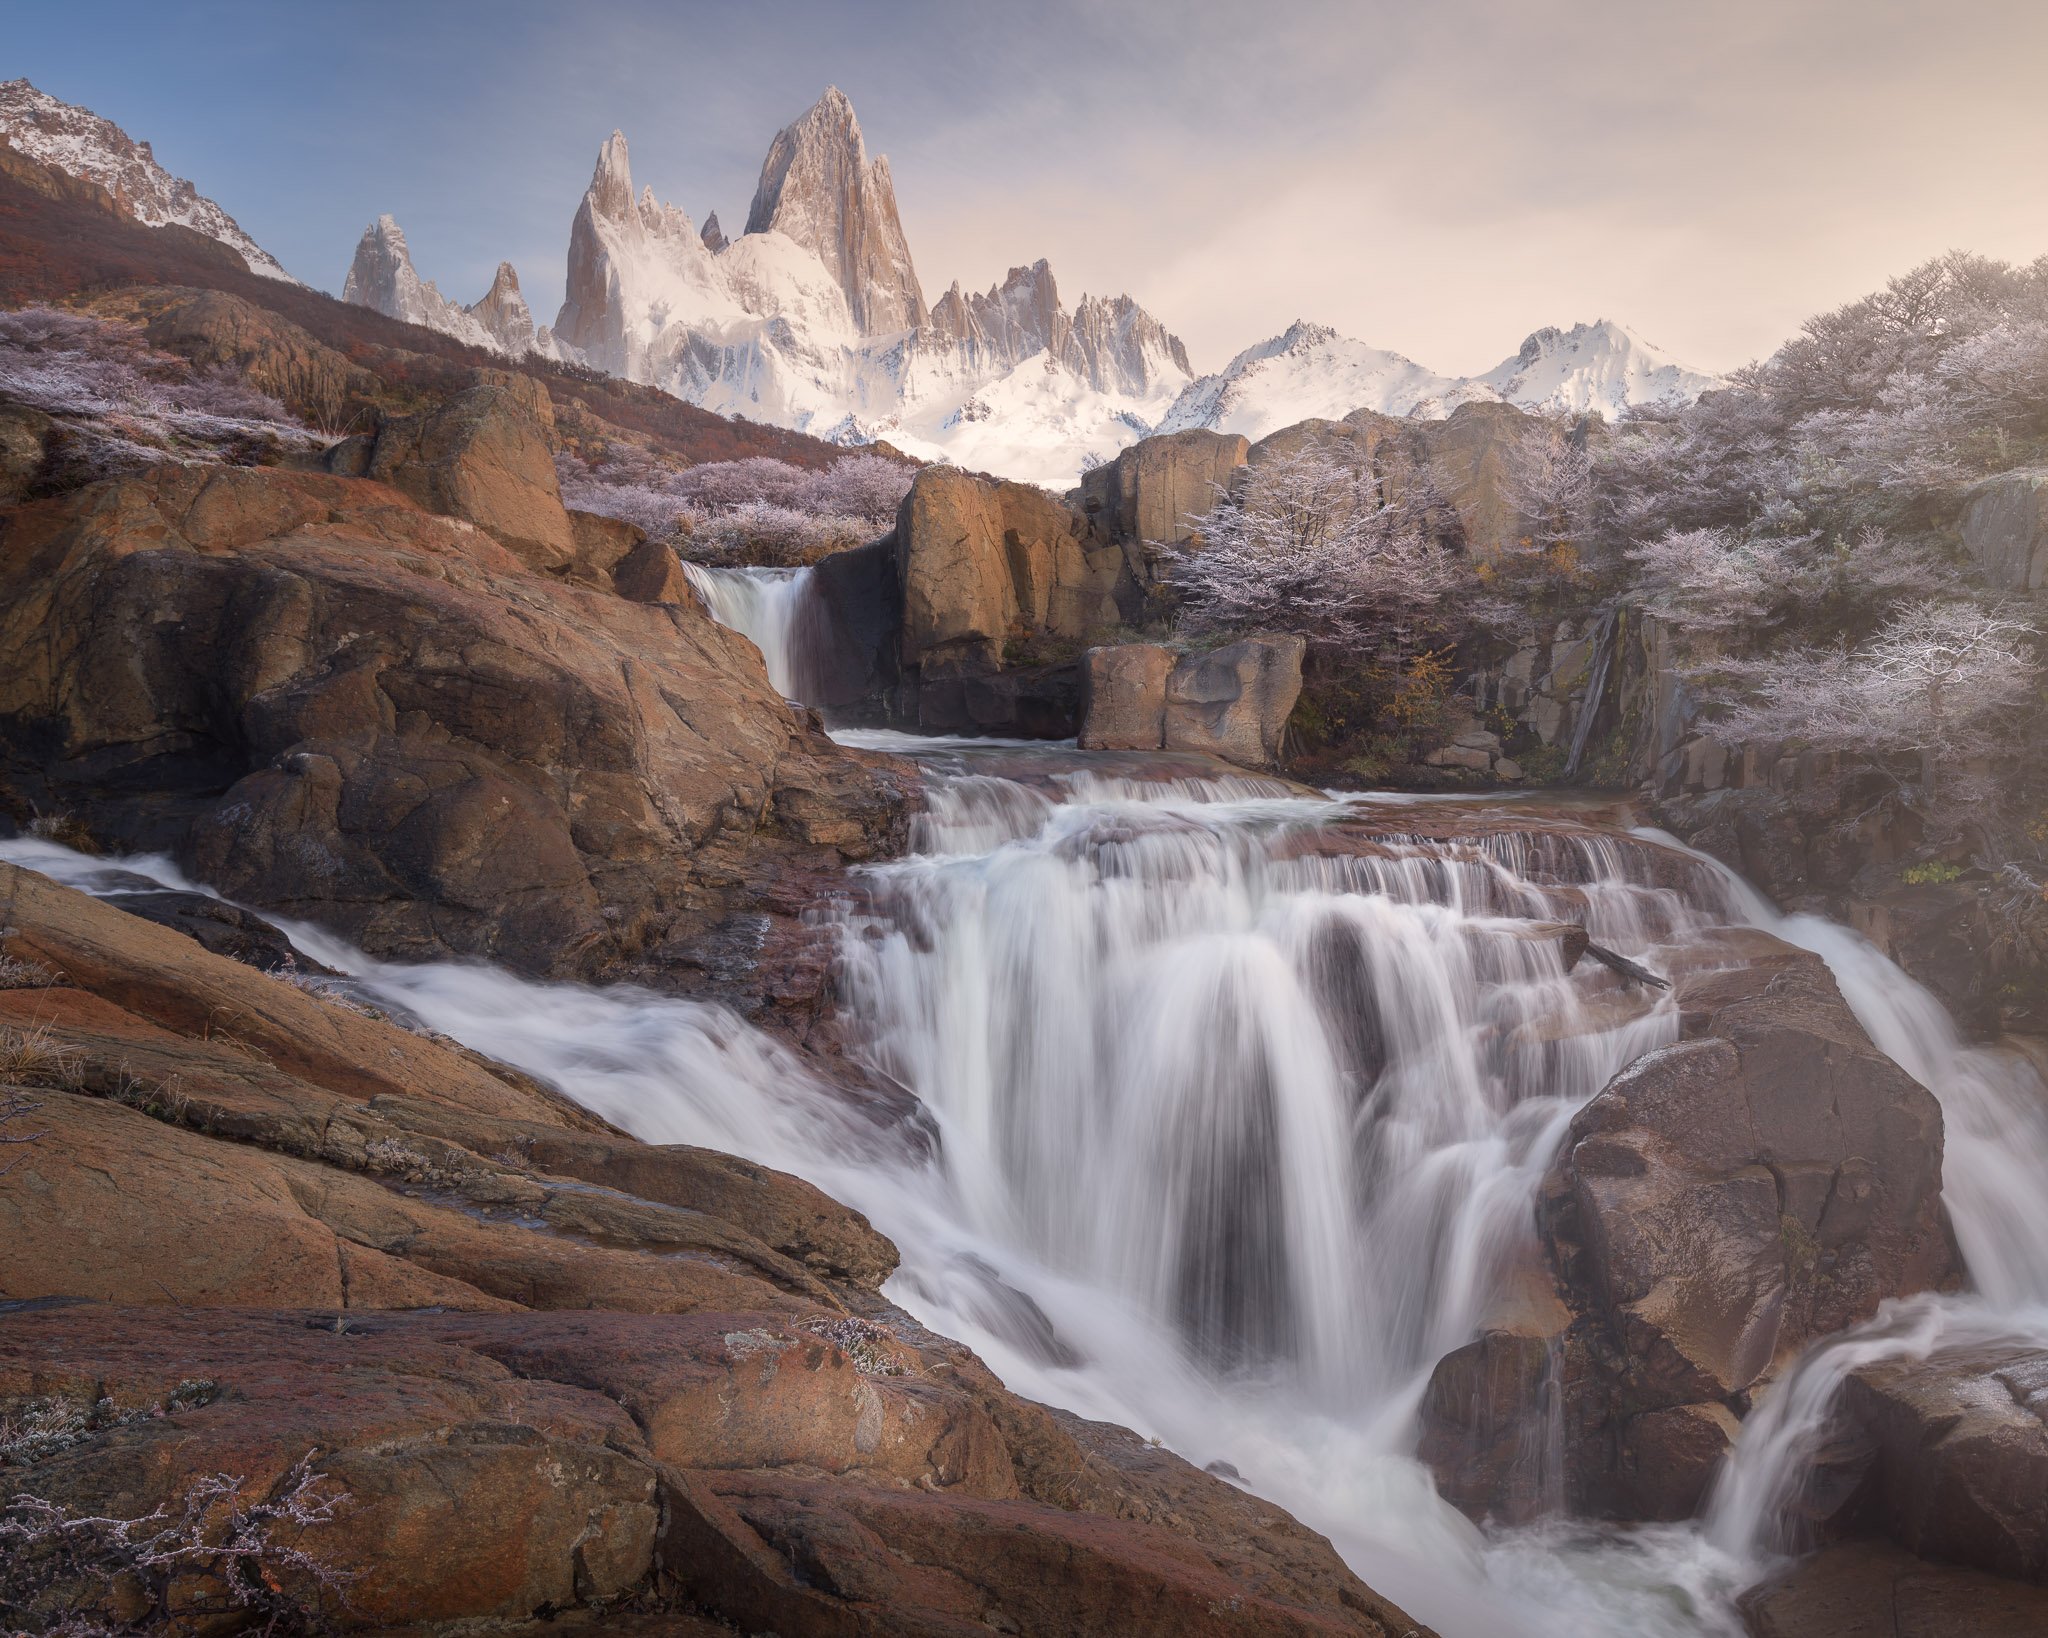 america, andes, argentina, autumn, beautiful, blue, canyon, cascada, cascade, chalten, clouds, el, fitz, fitzroy, frost, glaciares, glacier, gorge, granite, hiking, landmark, landscape, monte, morning, mount, mountain, national, nature, outdoor, park, pat, Andrey Omelyanchuk